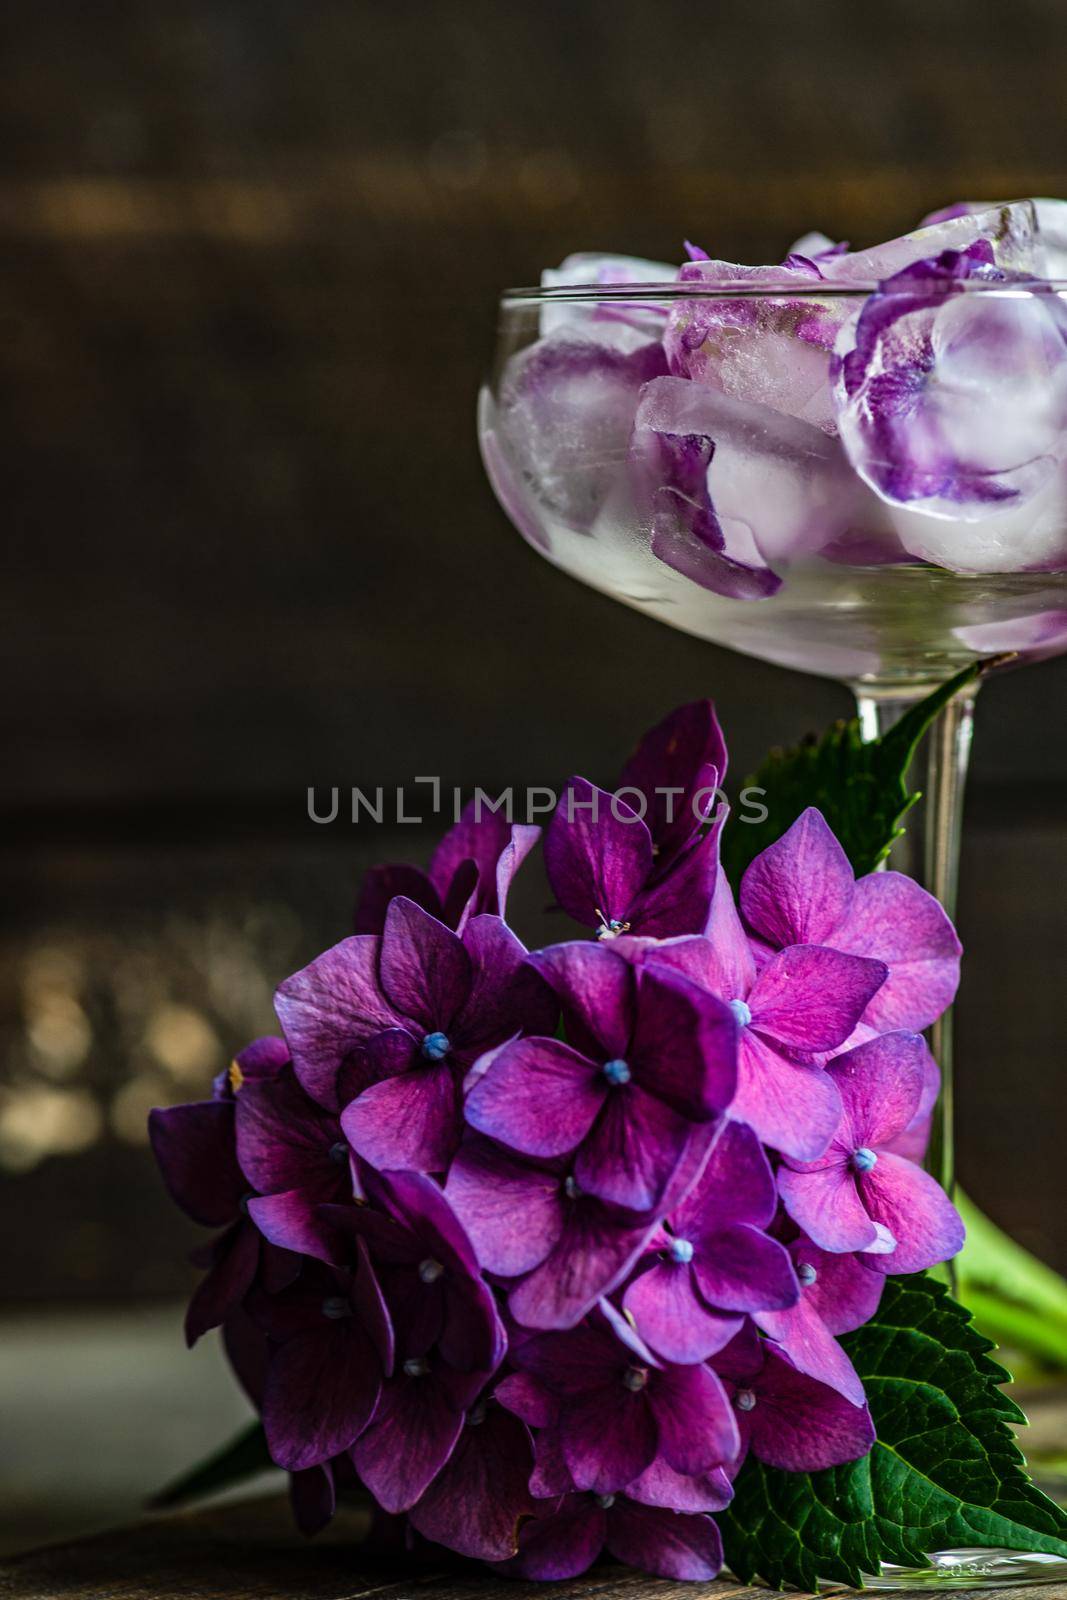 Glass with purple hydrangea flower ice cubes as a refreshing summer drink concept